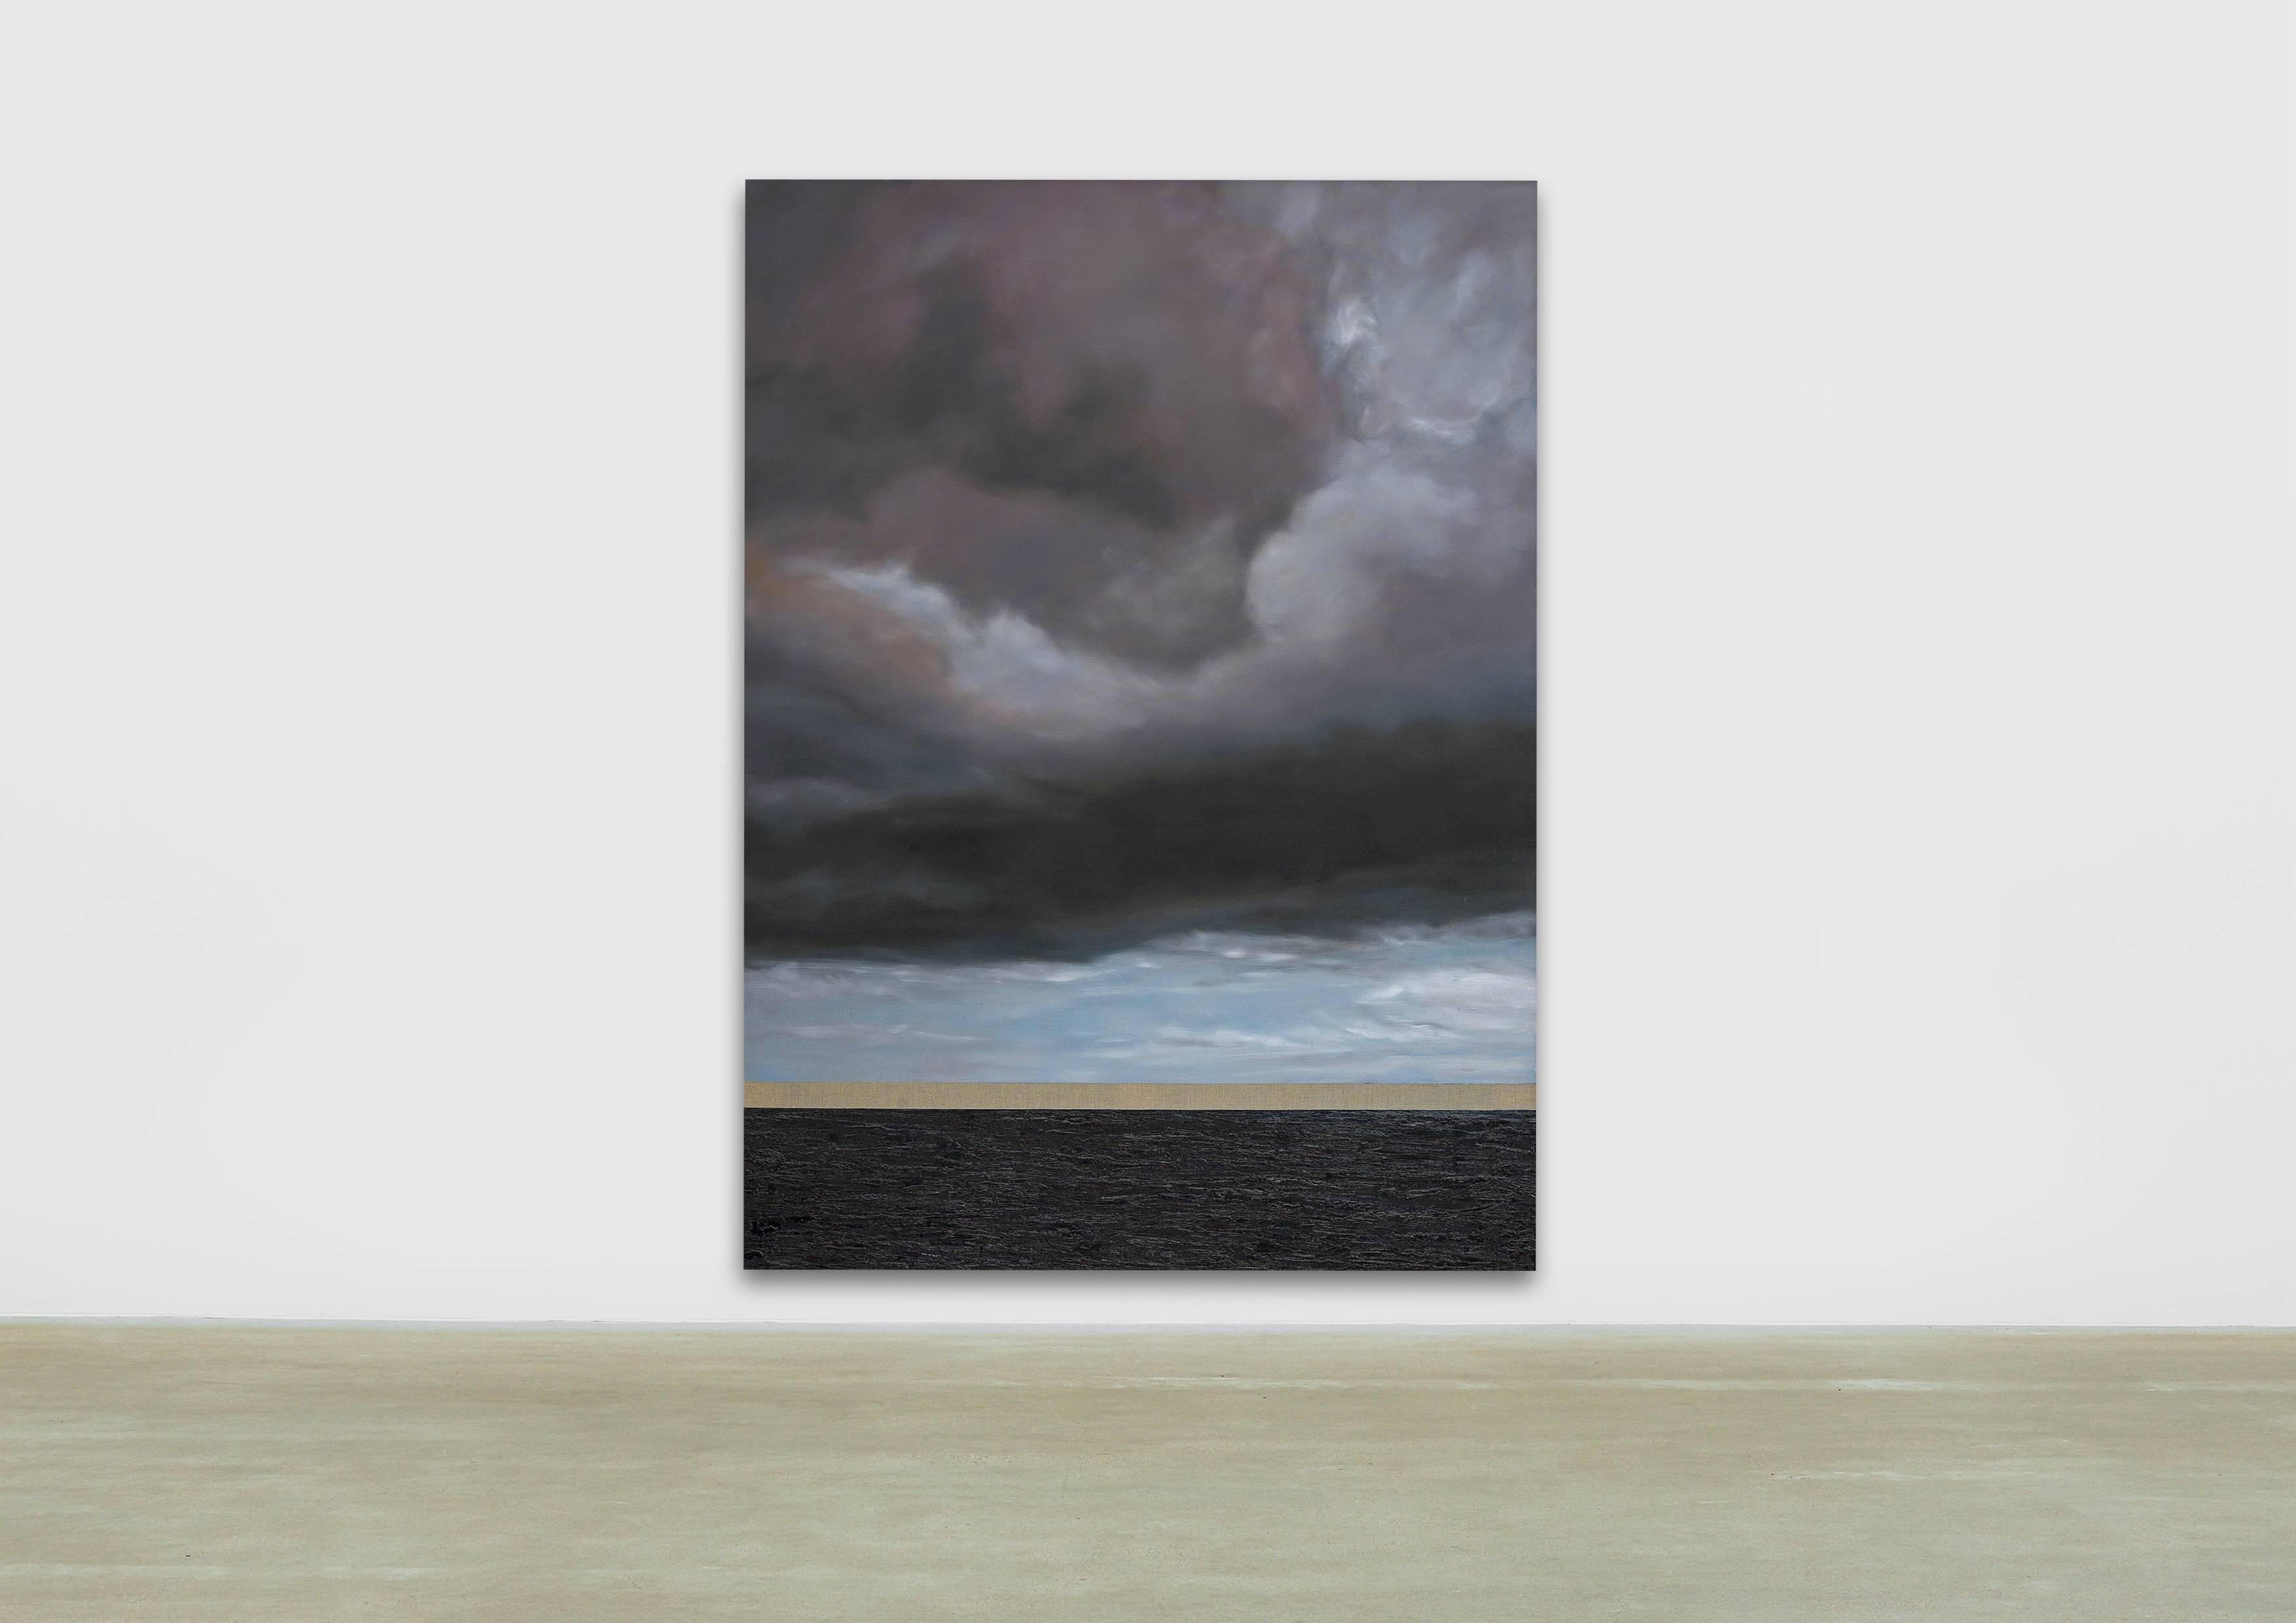 ELPIS / Hope - oil on linen, 84 x 60 inches - clouds, sea, water, grey, indigo - Painting by Frédéric Choisel